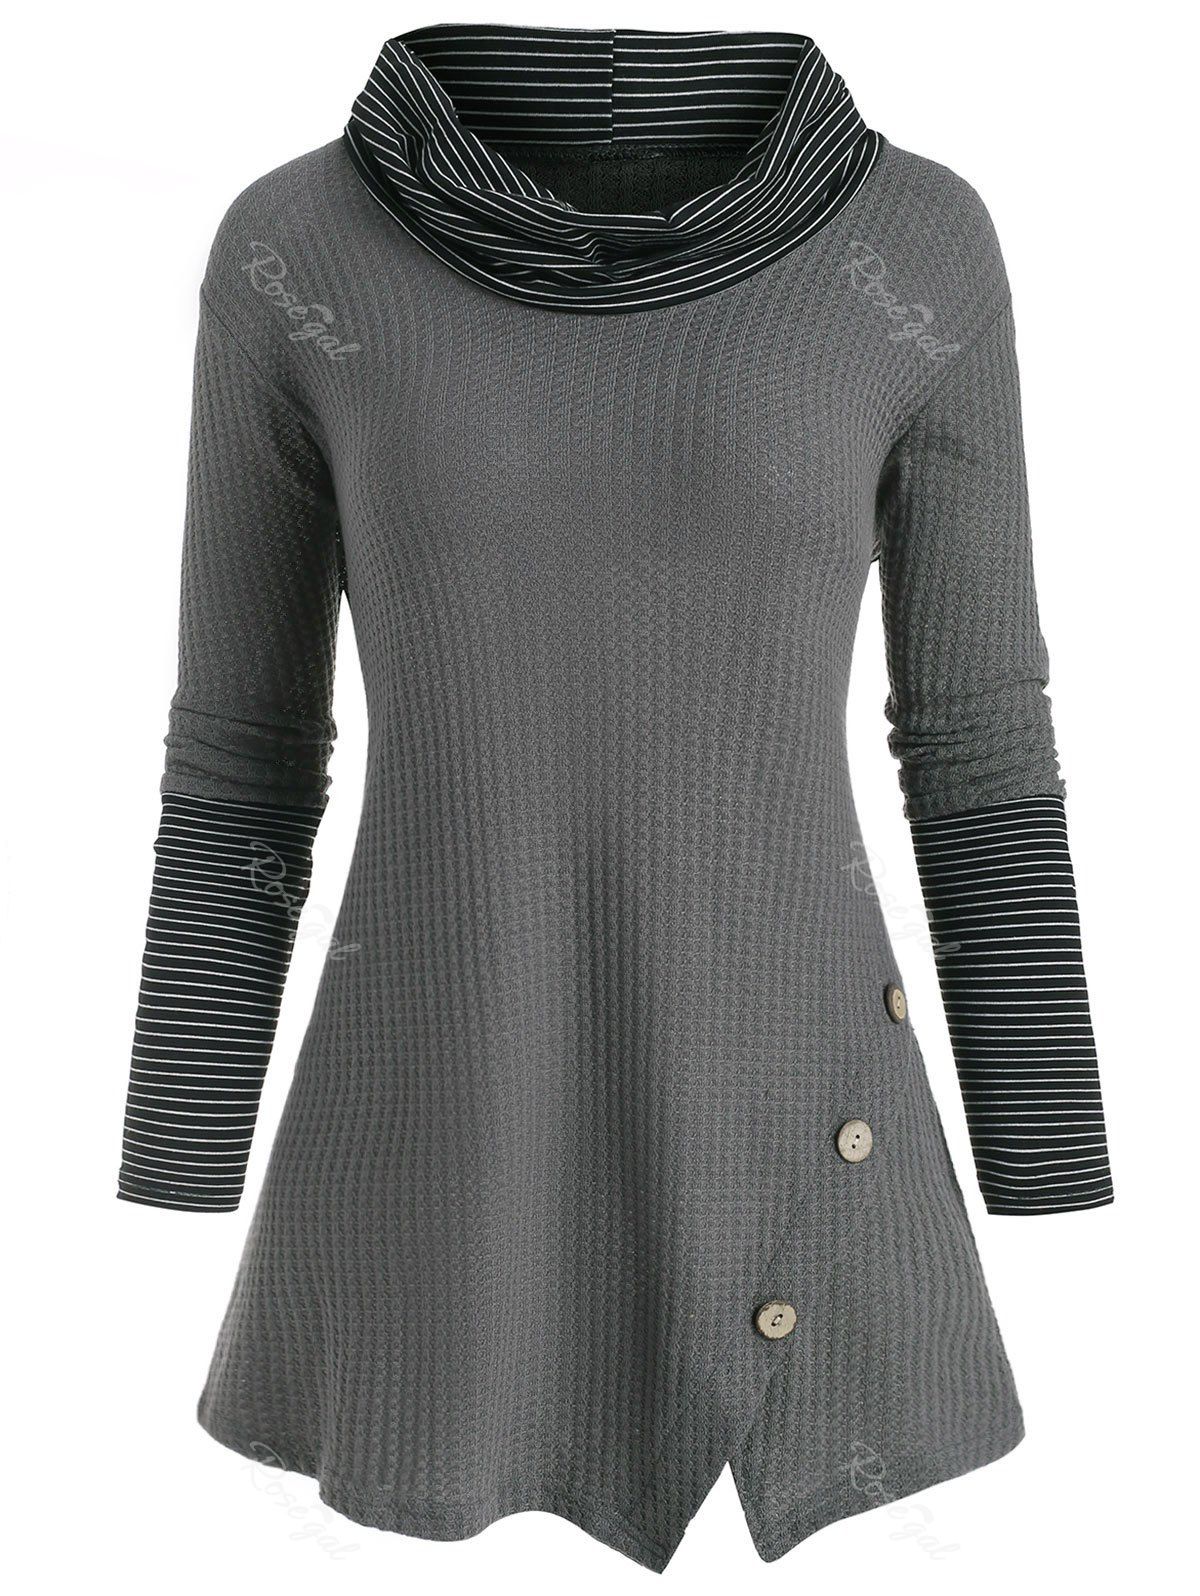 Outfits Striped Cowl Neck Tunic Knitwear  